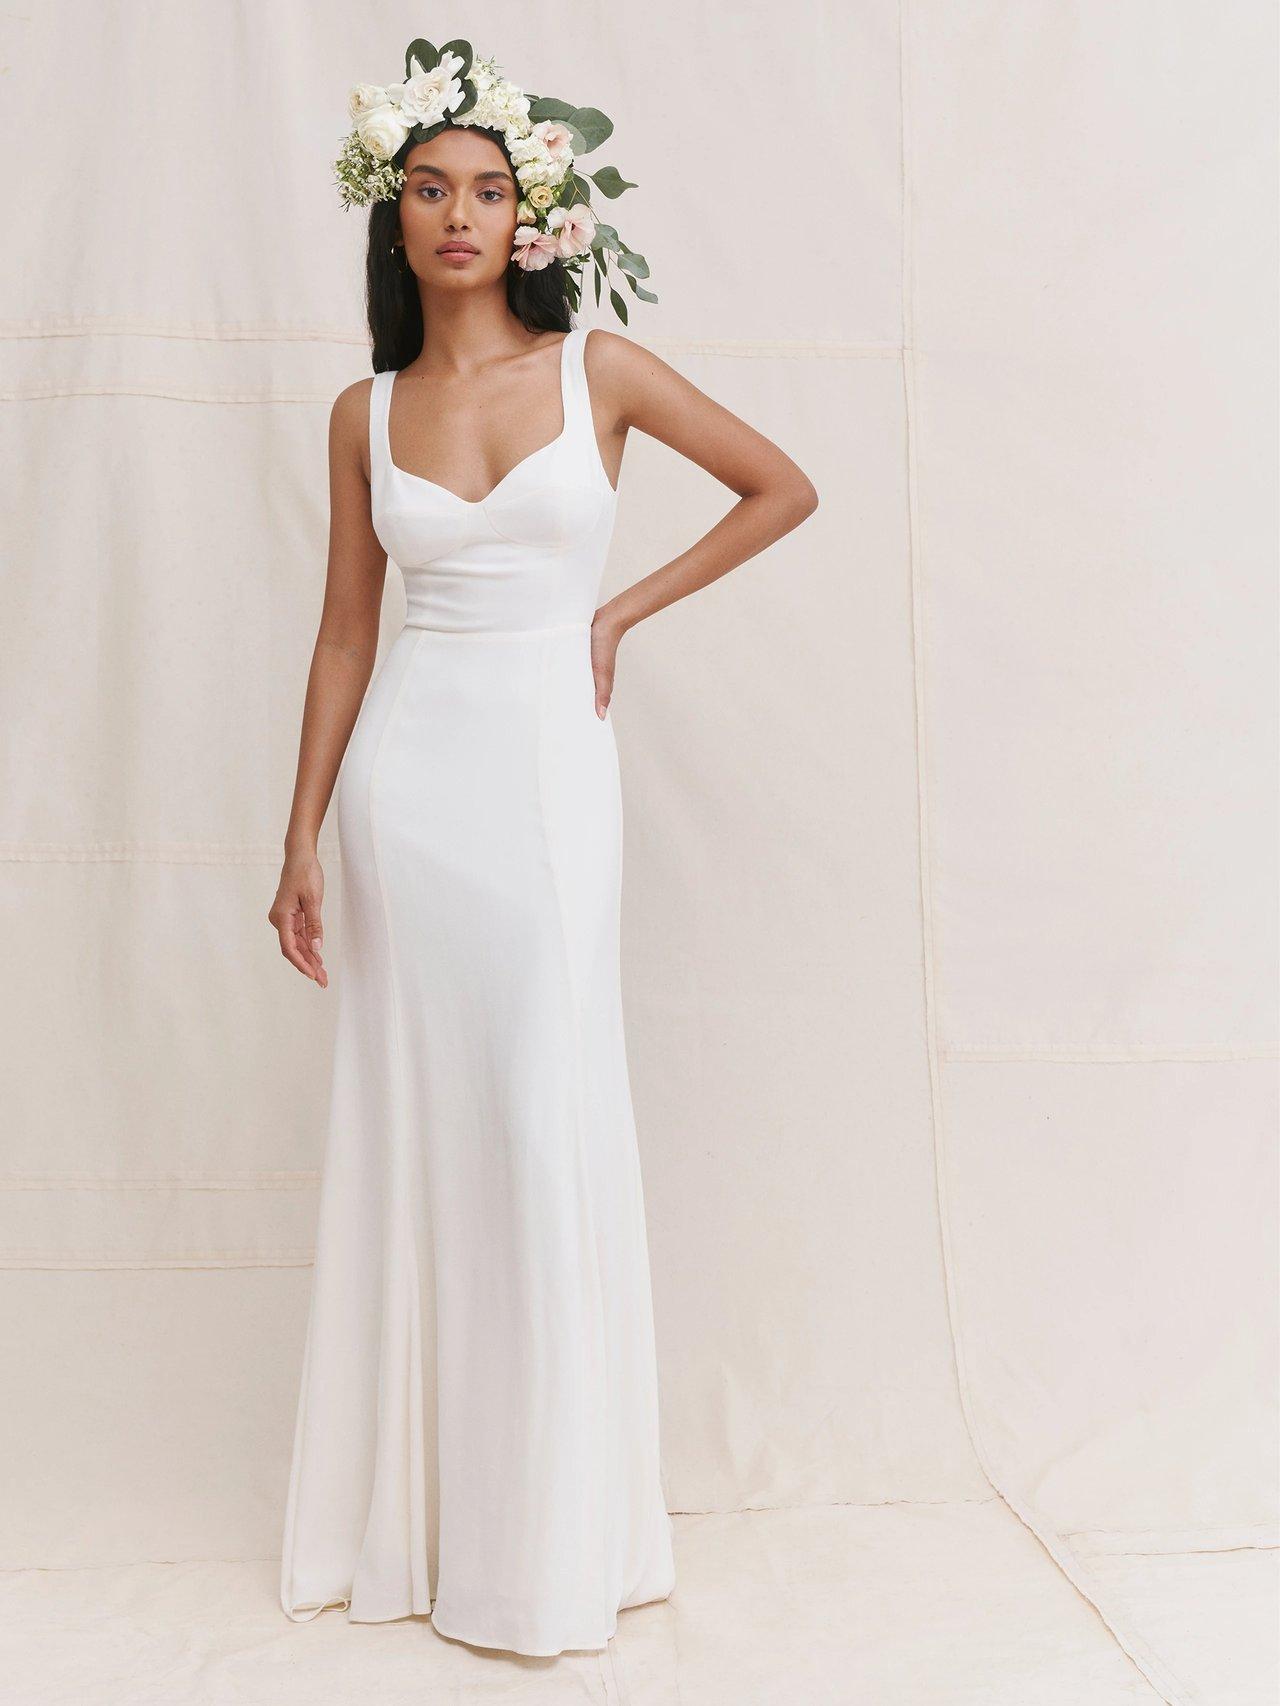 Affordable Wedding Dresses: 50 Cheap Wedding Dresses for Brides on a ...